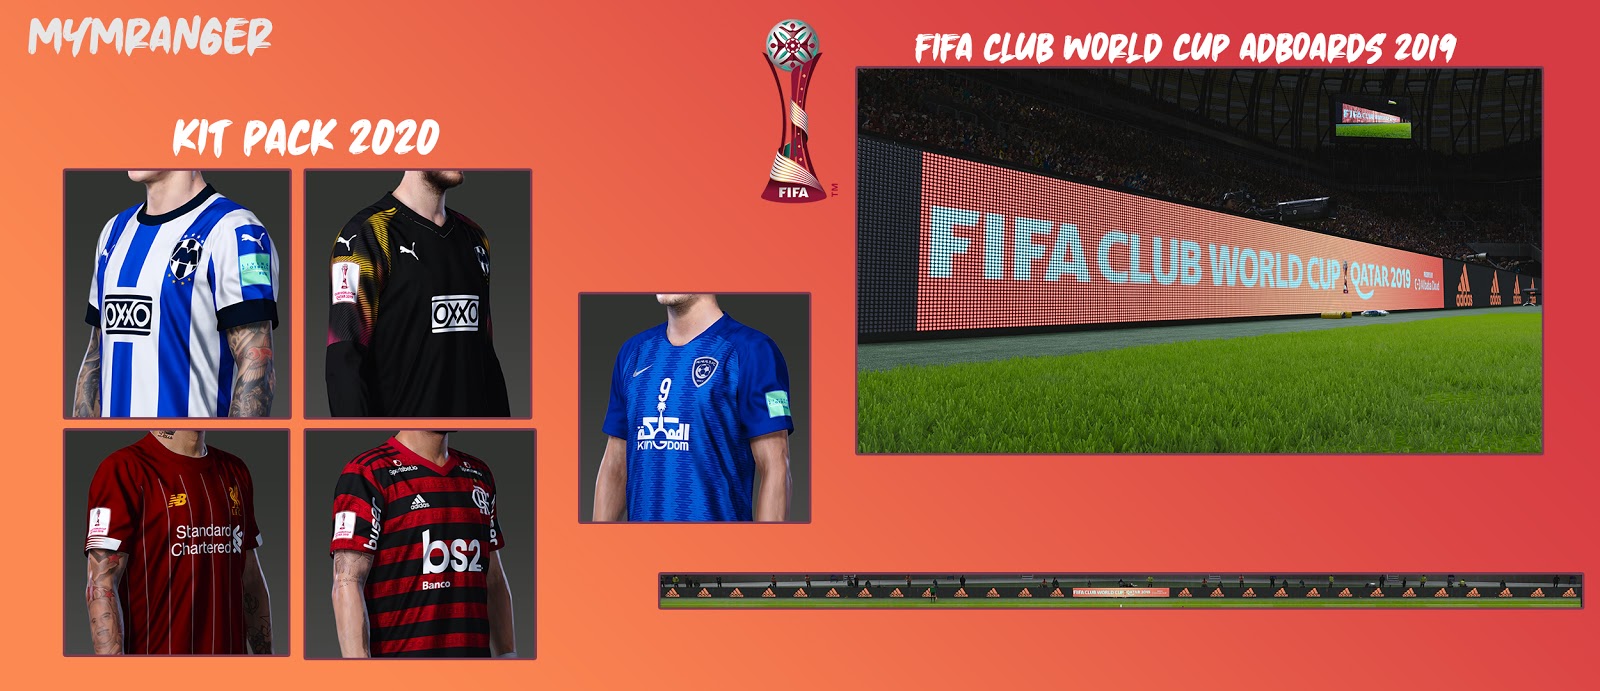 Pes 2020 Mega Pack Update Fifa Club World Cup 2019 By Mymranger Pes